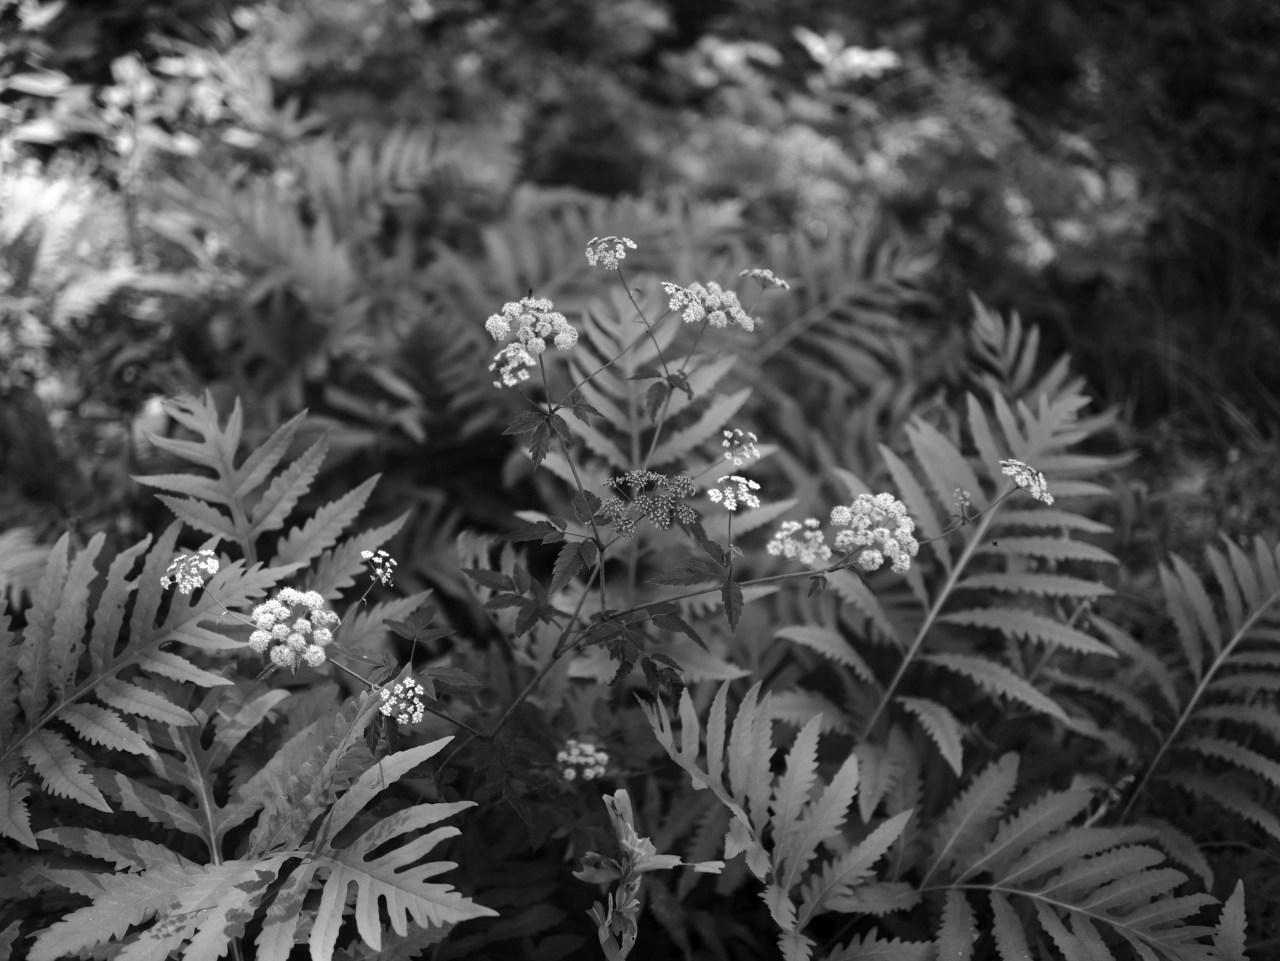 Ferns and weeds in fifty shades of...